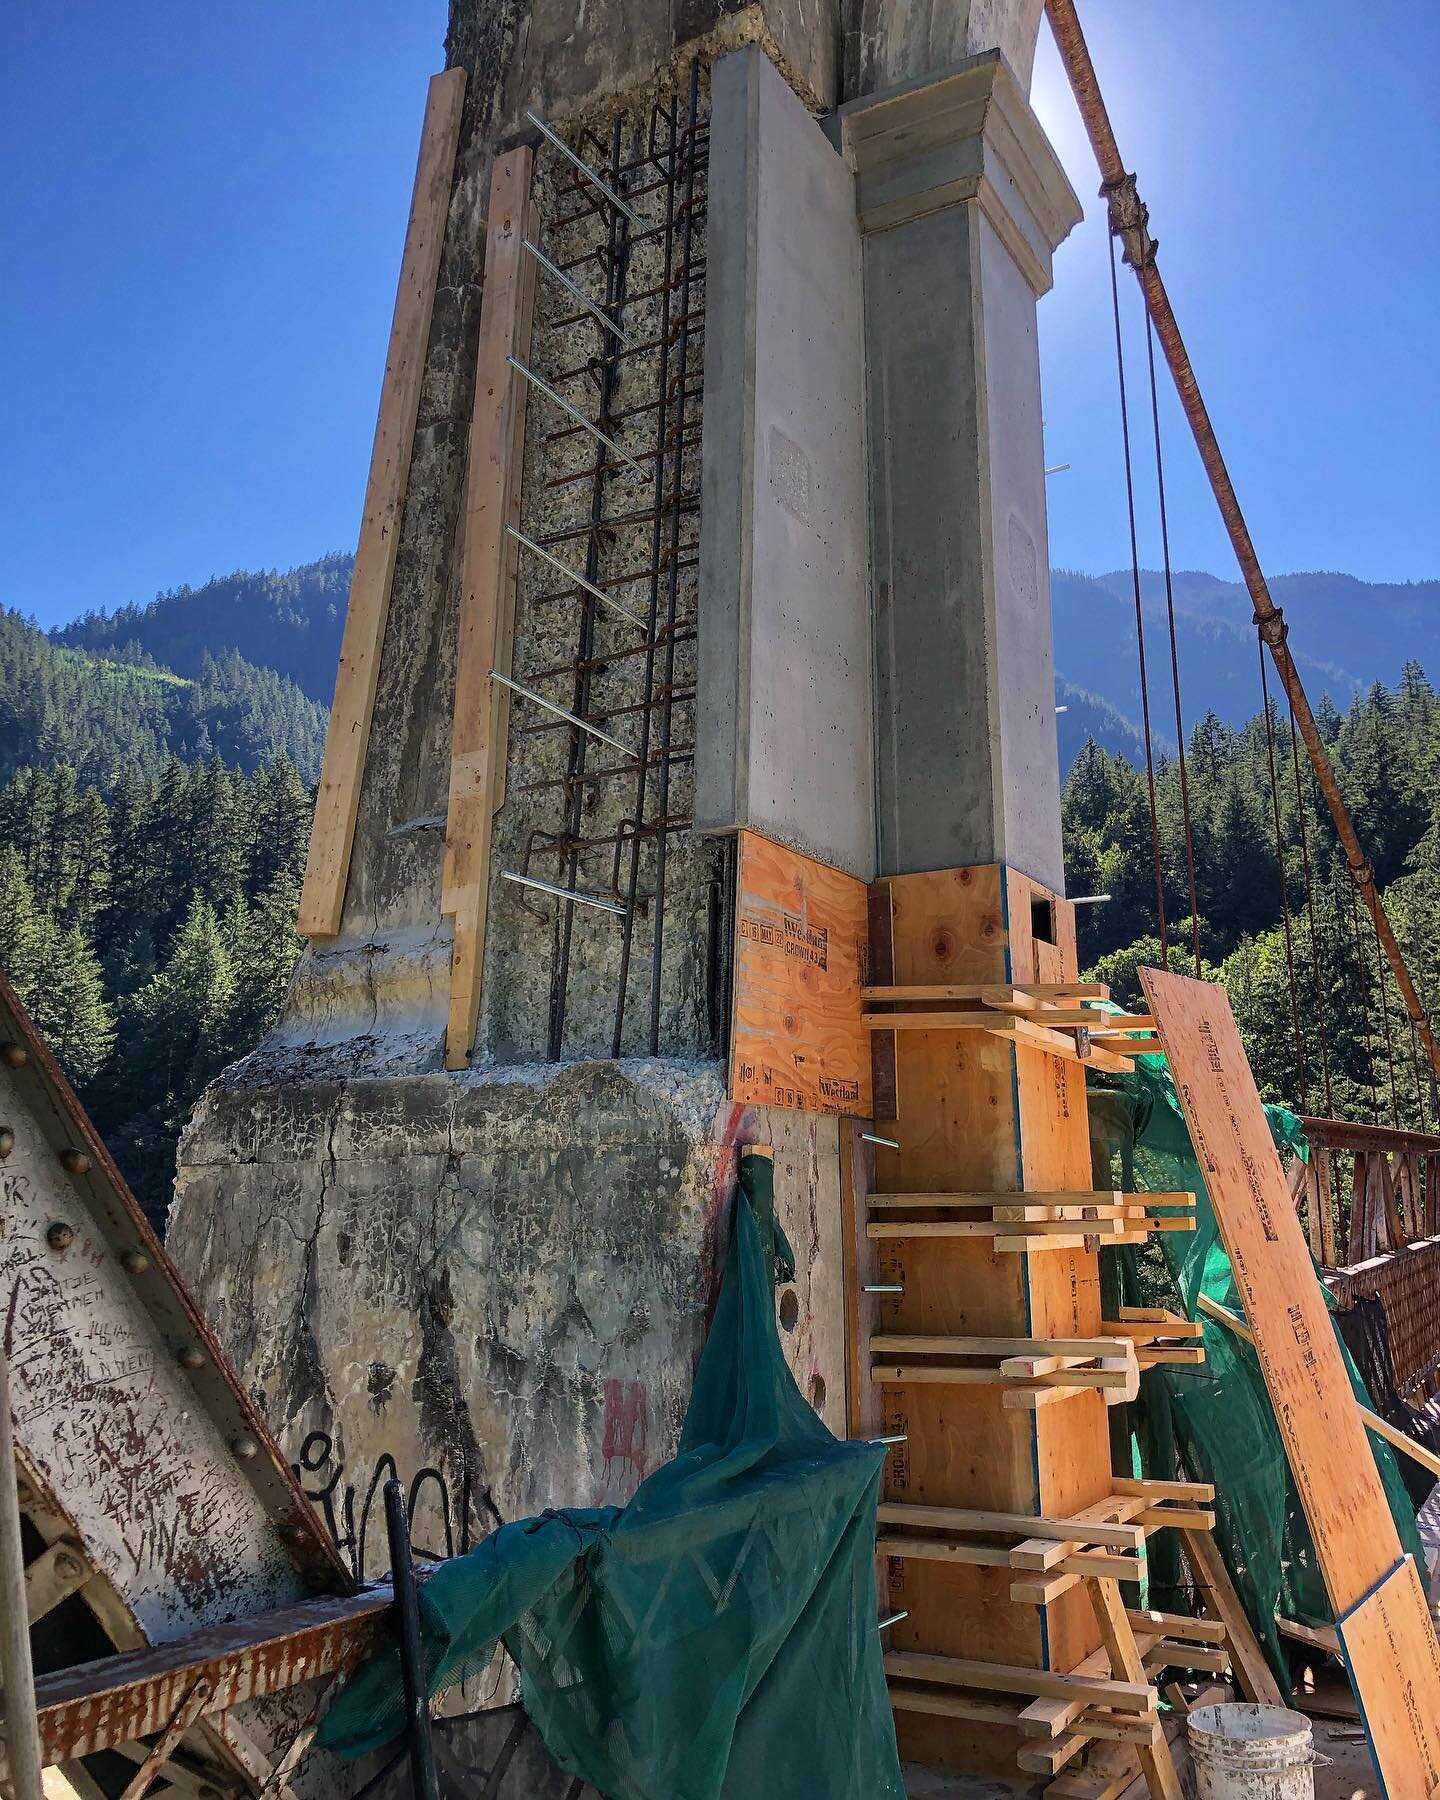 Back on the bridge! Giving @heritagemasonry a hand with some formwork for the Old Alexandra Bridge restoration. 
.
.
.
.
.
#concrete #restoration #formwork #remote #bridge #engineering #architecture #heritage #carpentry